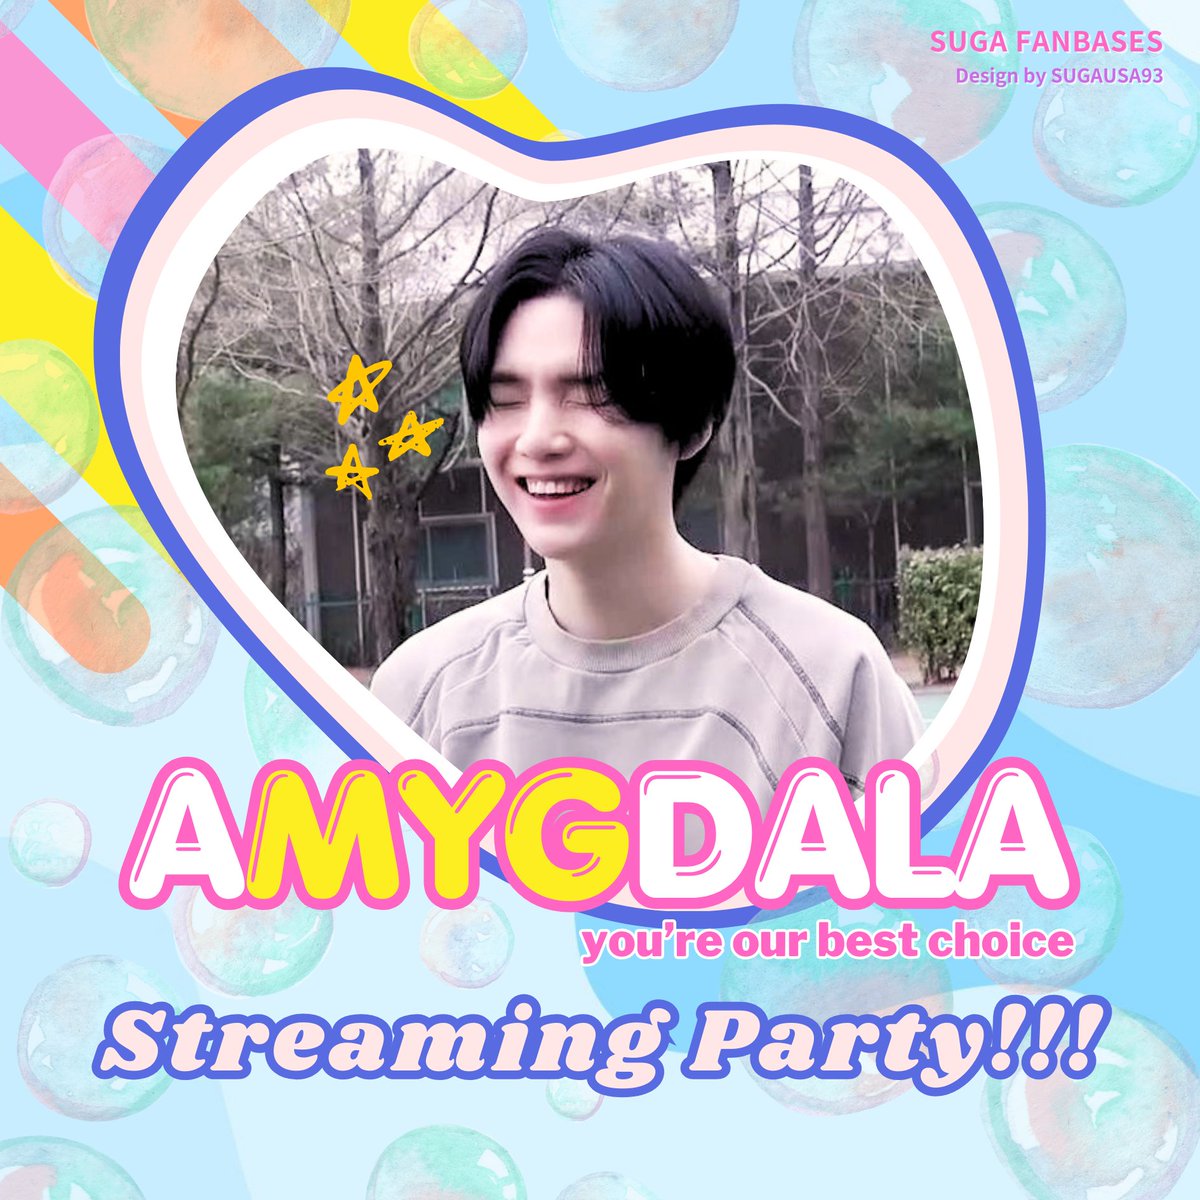 🎊 AMYGDALA STREAMING PARTY🎊 Get ready to make the 1st Anniversary of Amygdala a memorable one. 🛵💨 🗓 25th April ⏰ 9 pm KST Hosts : Stay Tuned! WE LOVE YOU YOONGI #1YearWithAMYGDALA #1YearWithDDay